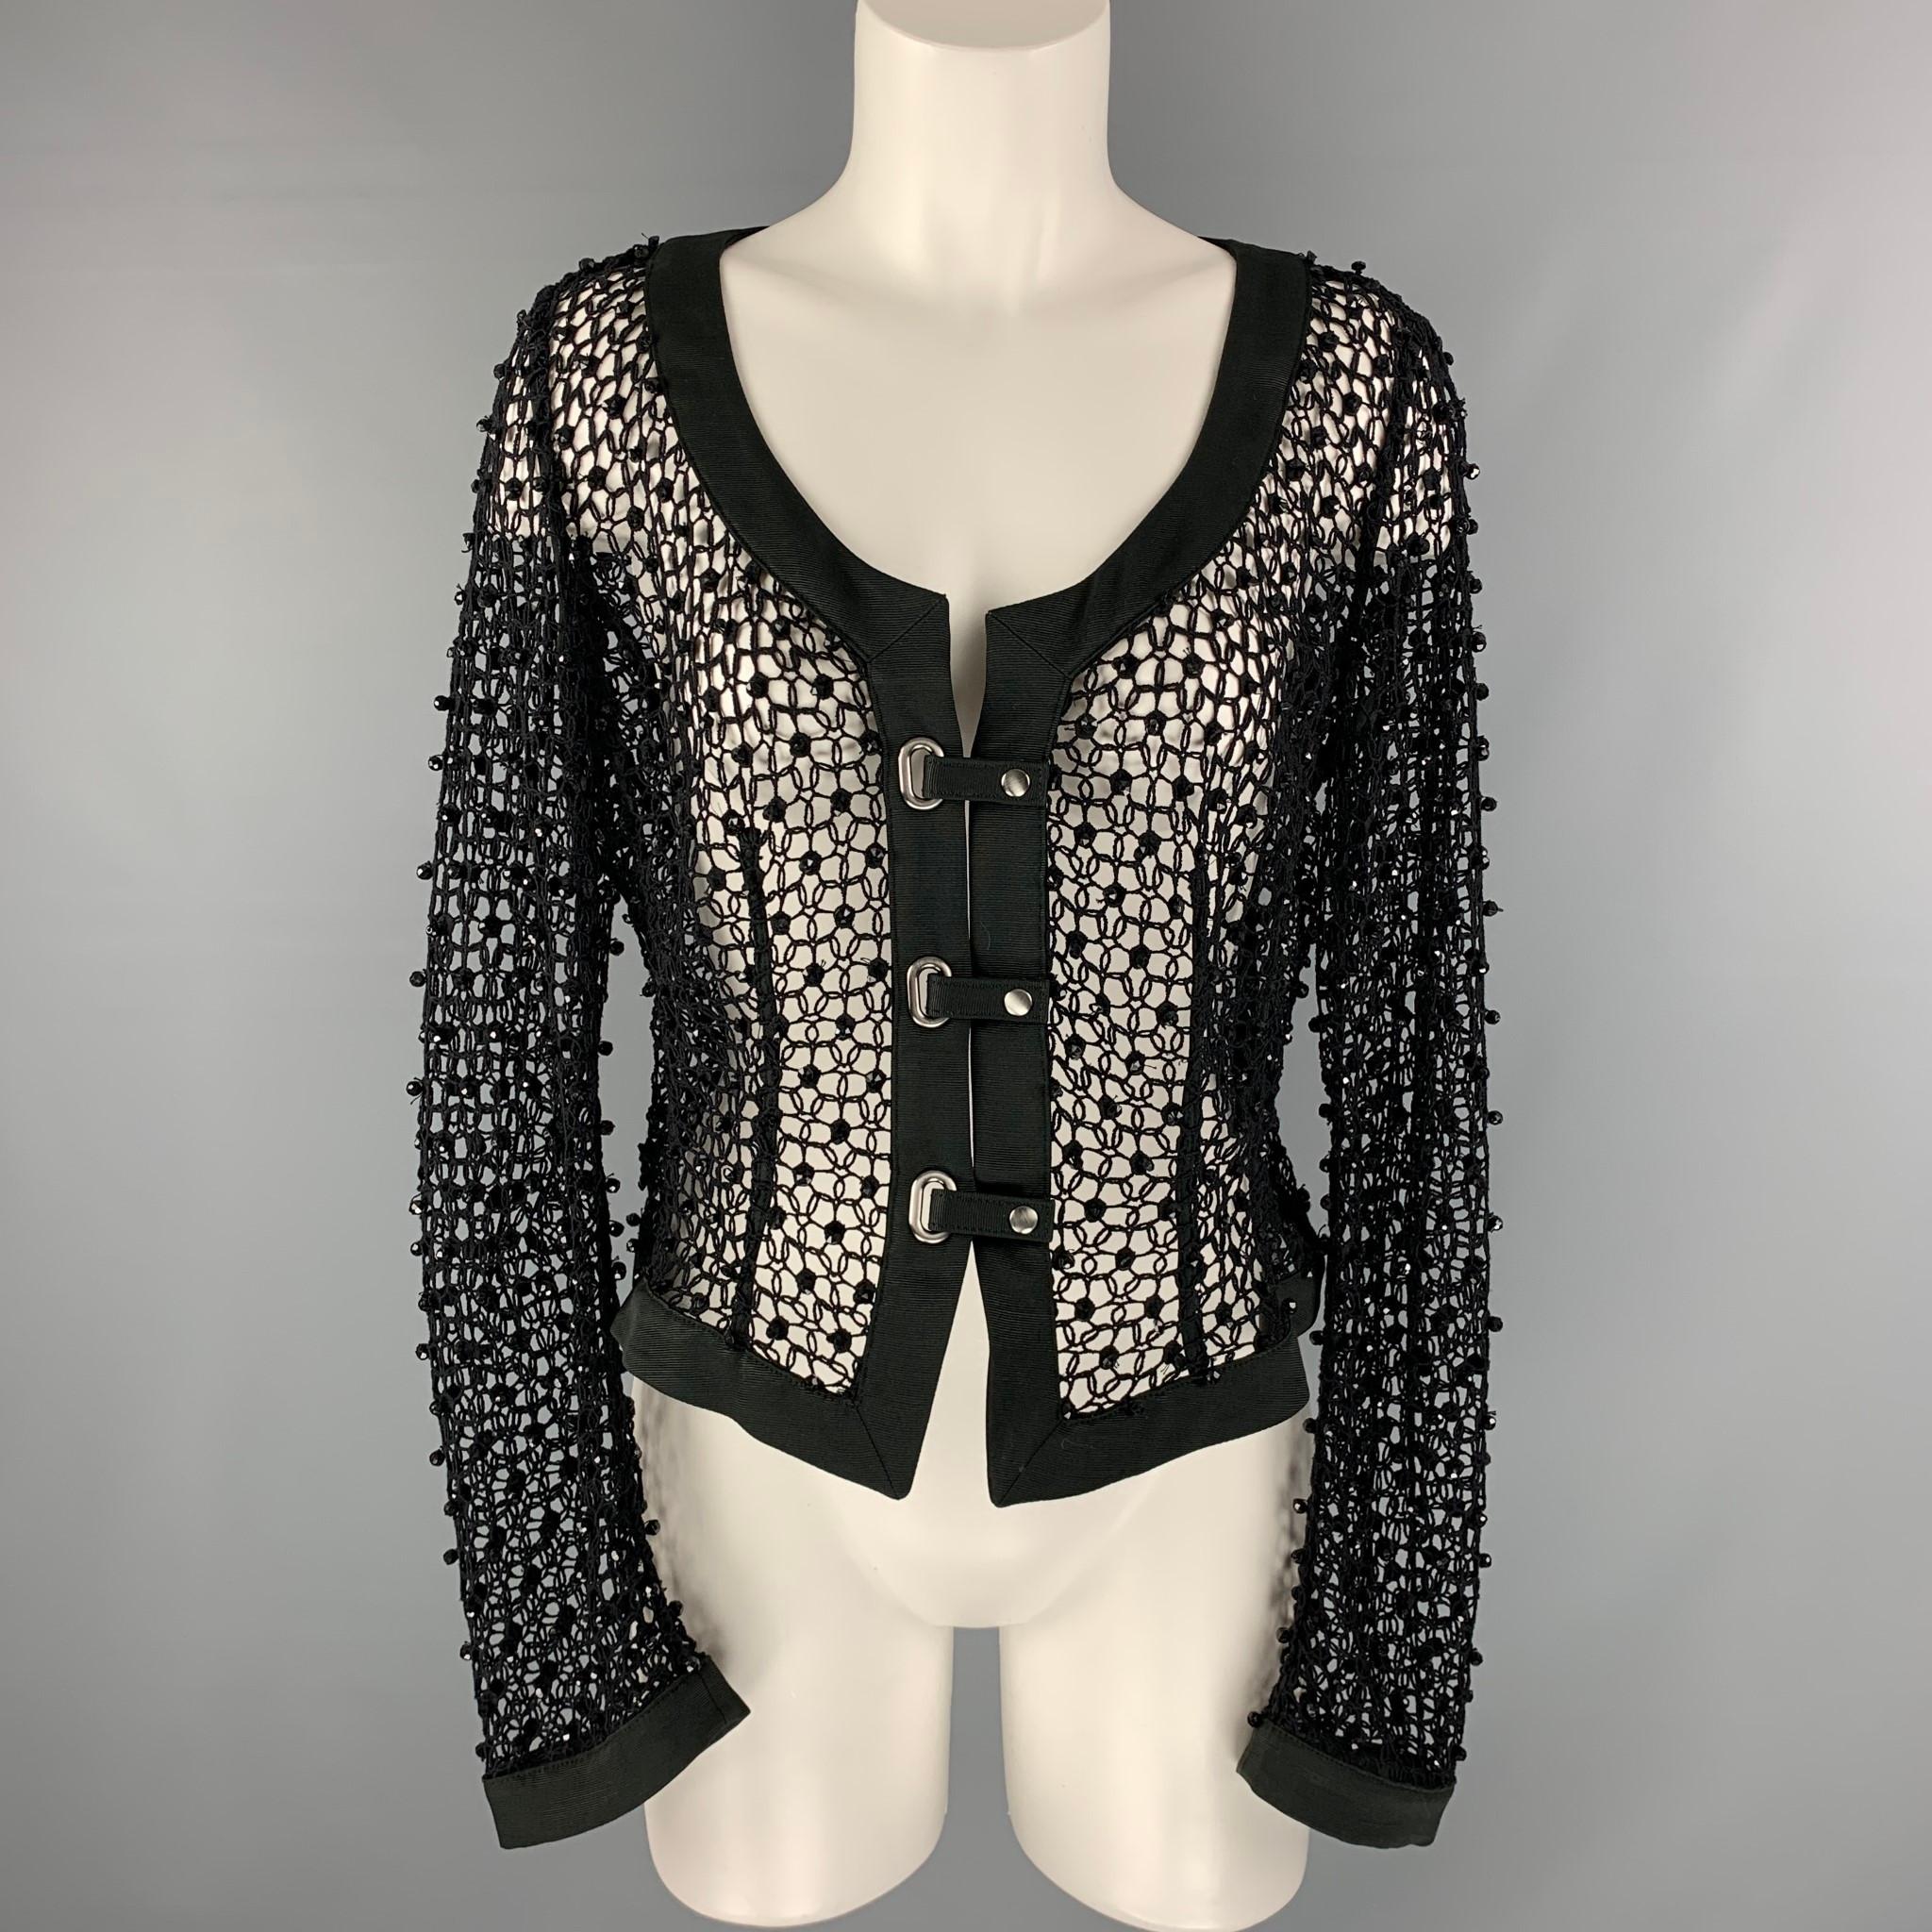 ARMANI COLLEZIONI jacket comes in black mesh fabric, scoop neck, cross over snap button closure and black beaded sequins. Made in Italy.

Excellent Pre-Owned Condition. Fabric Tag Removed.
Marked: 10

Measurements:

Shoulder: 15 in.
Bust: 40